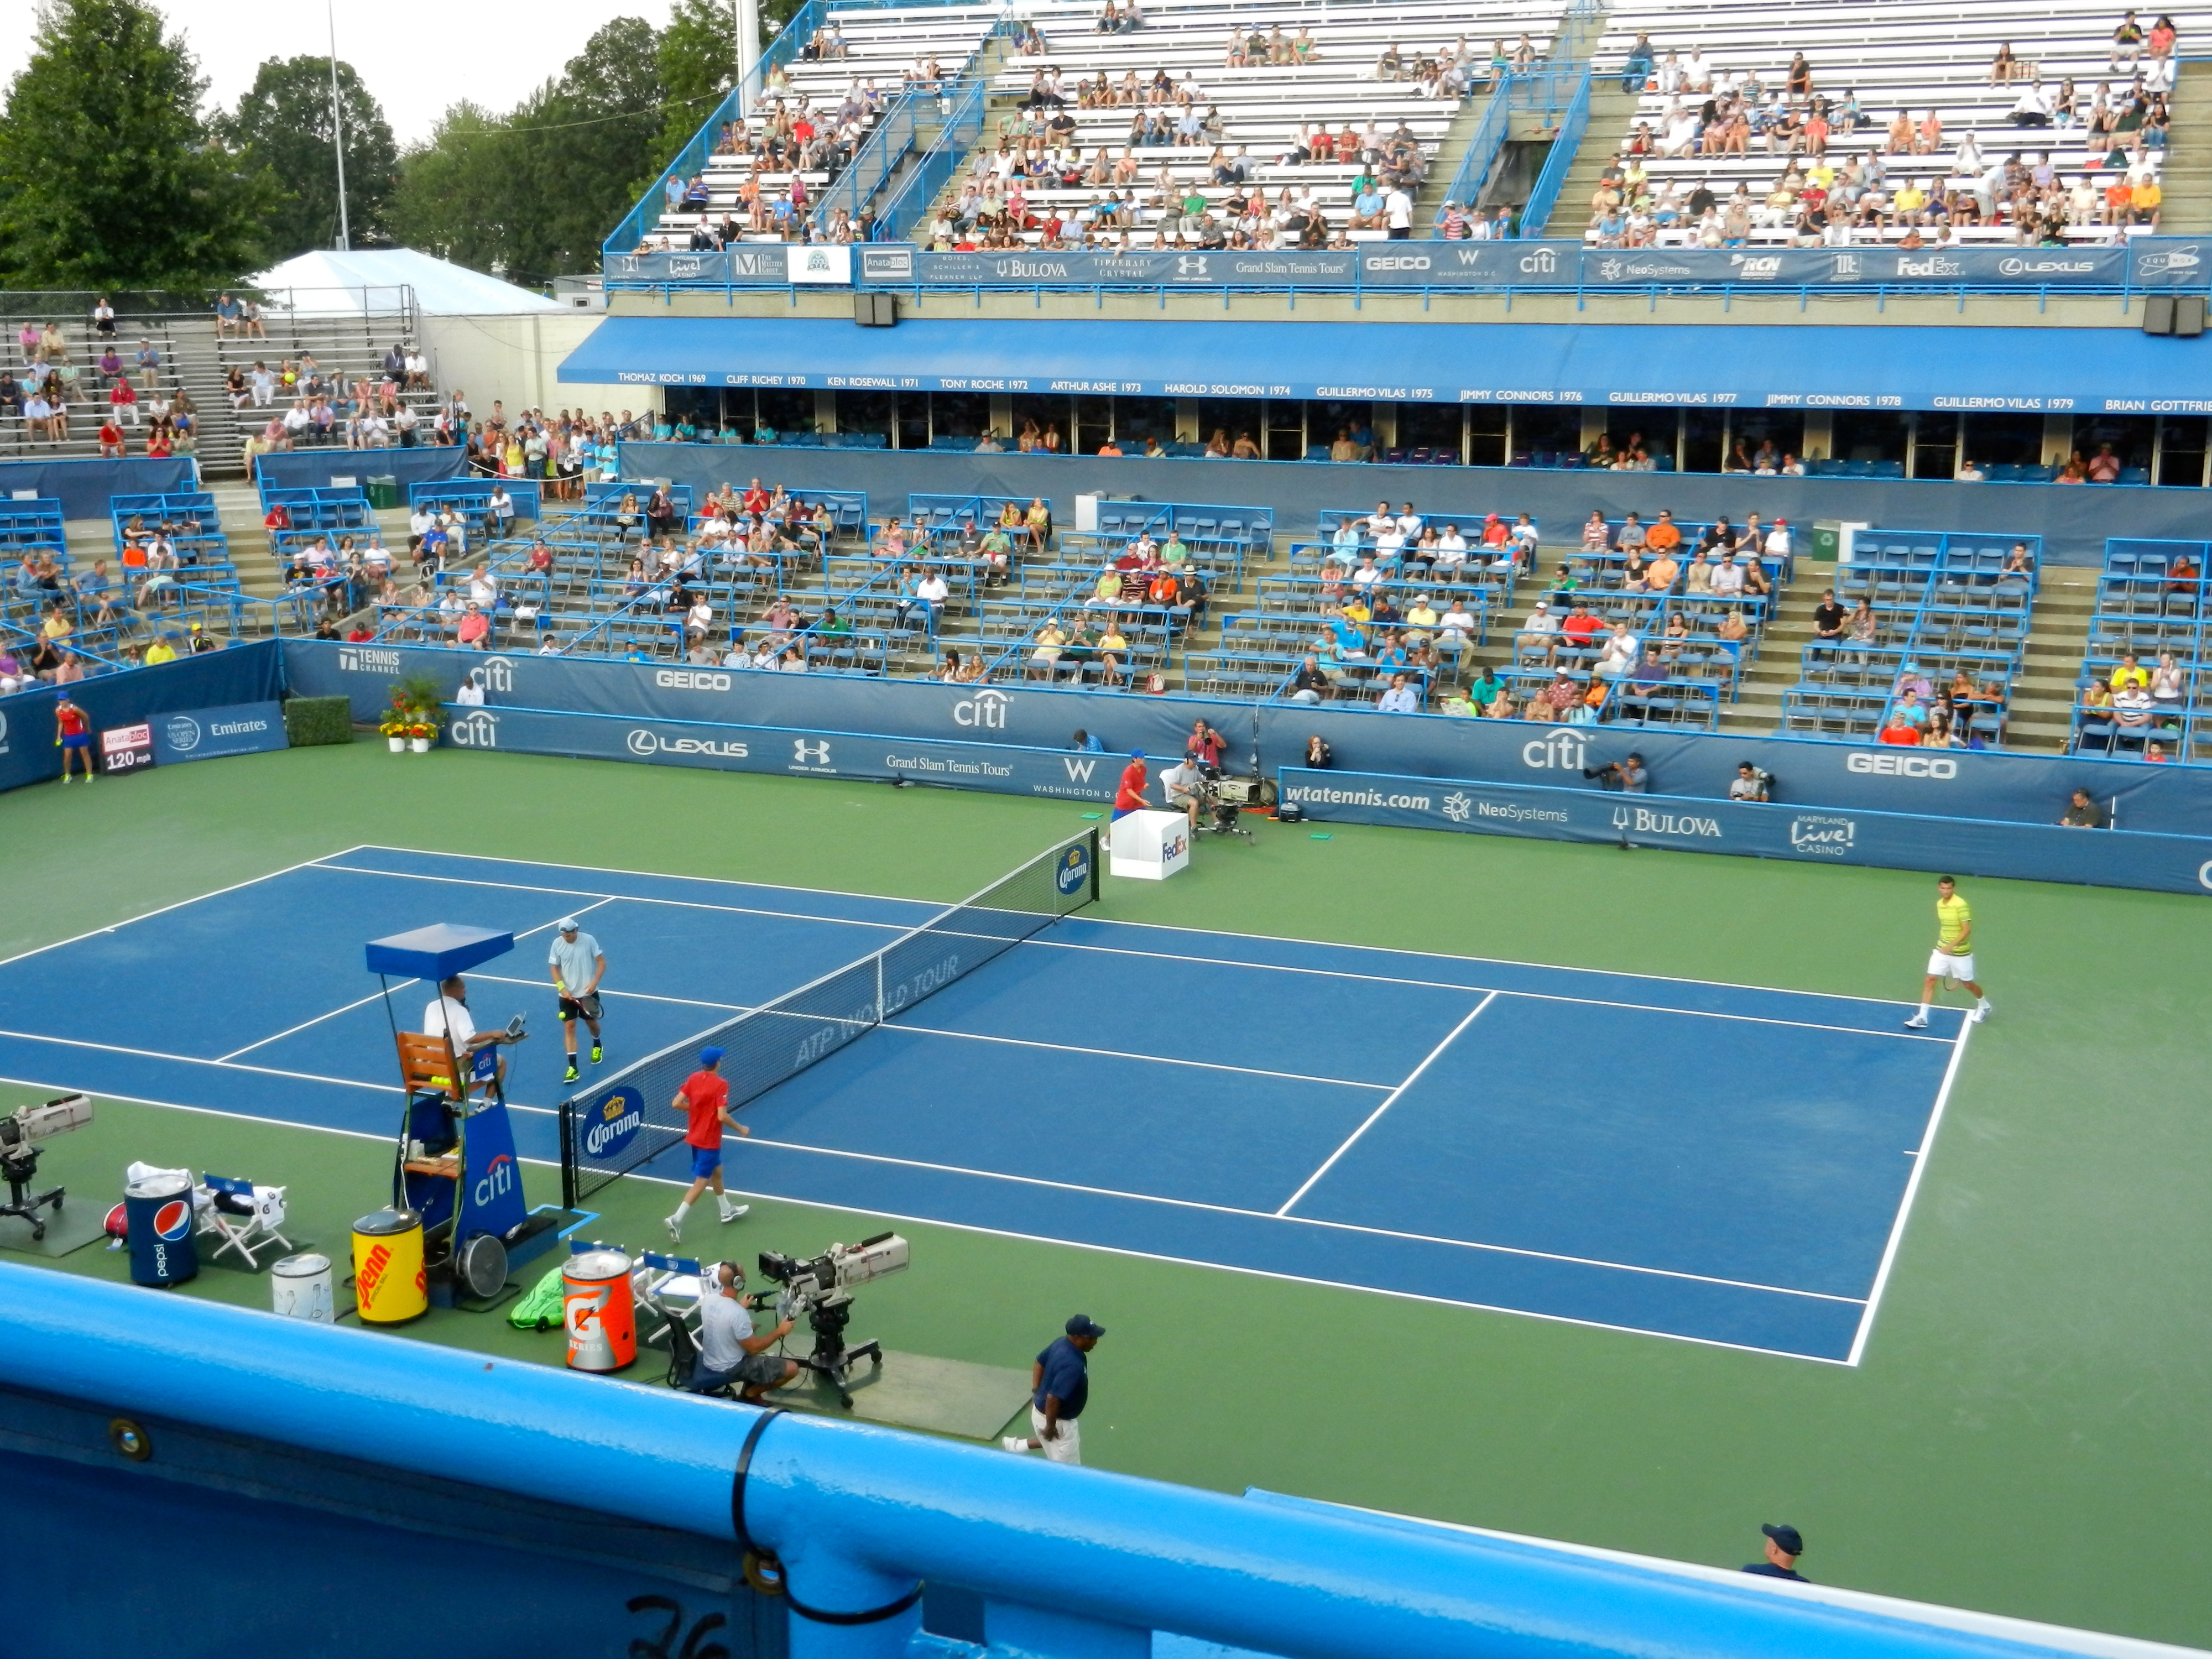 An ‘Epic’ Toast at Friday’s CitiOpen Quarter Finals